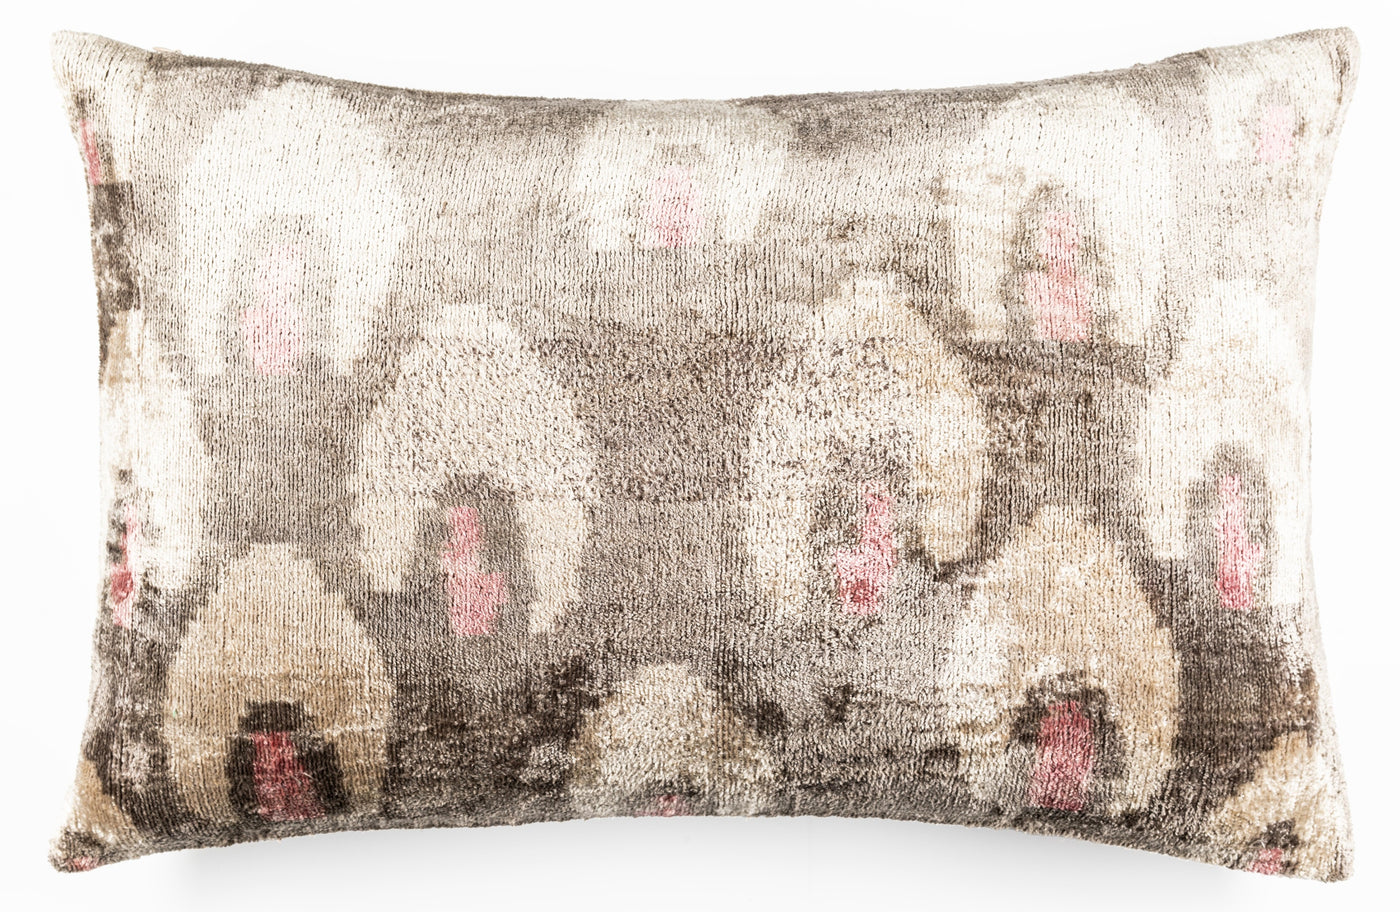 Canvello Organic Handmade Silk Velvet Pillow: 16x24 Inches with Premium Down Feather Insert - Luxury Gray Ivory Pink